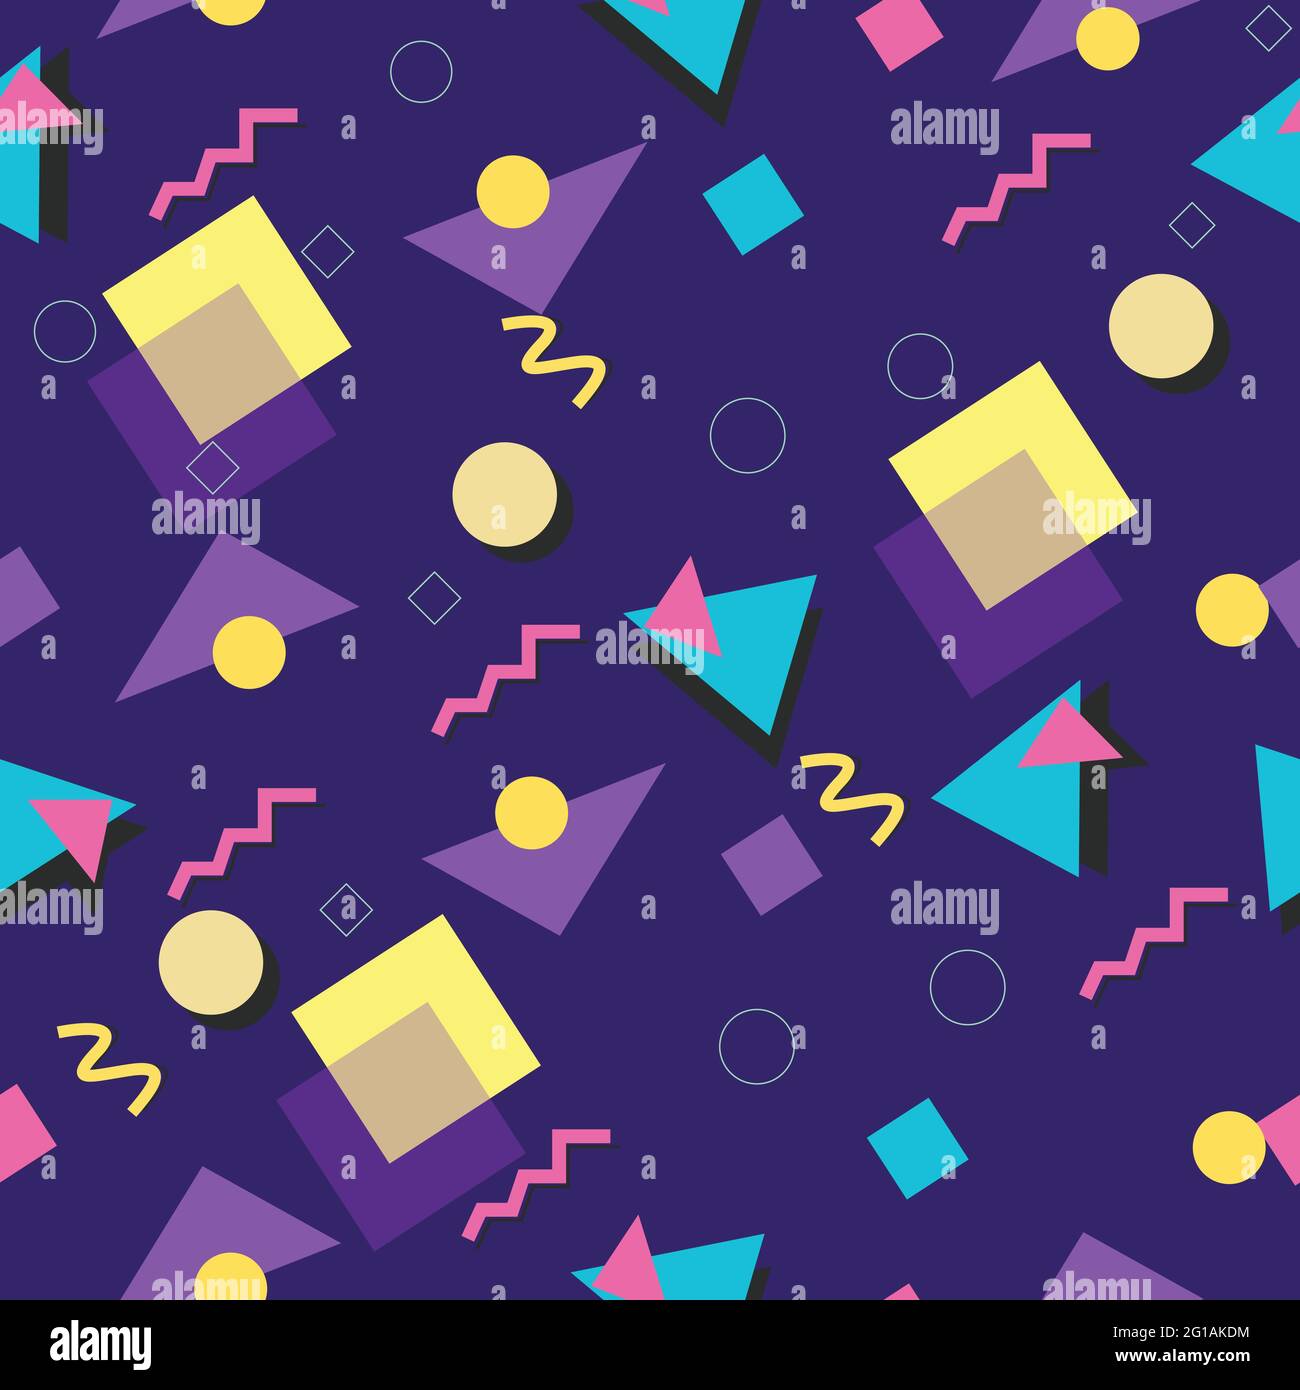 90s and 80s Style Seamless Pattern Background Wallpaper Stock Vector Image  & Art - Alamy